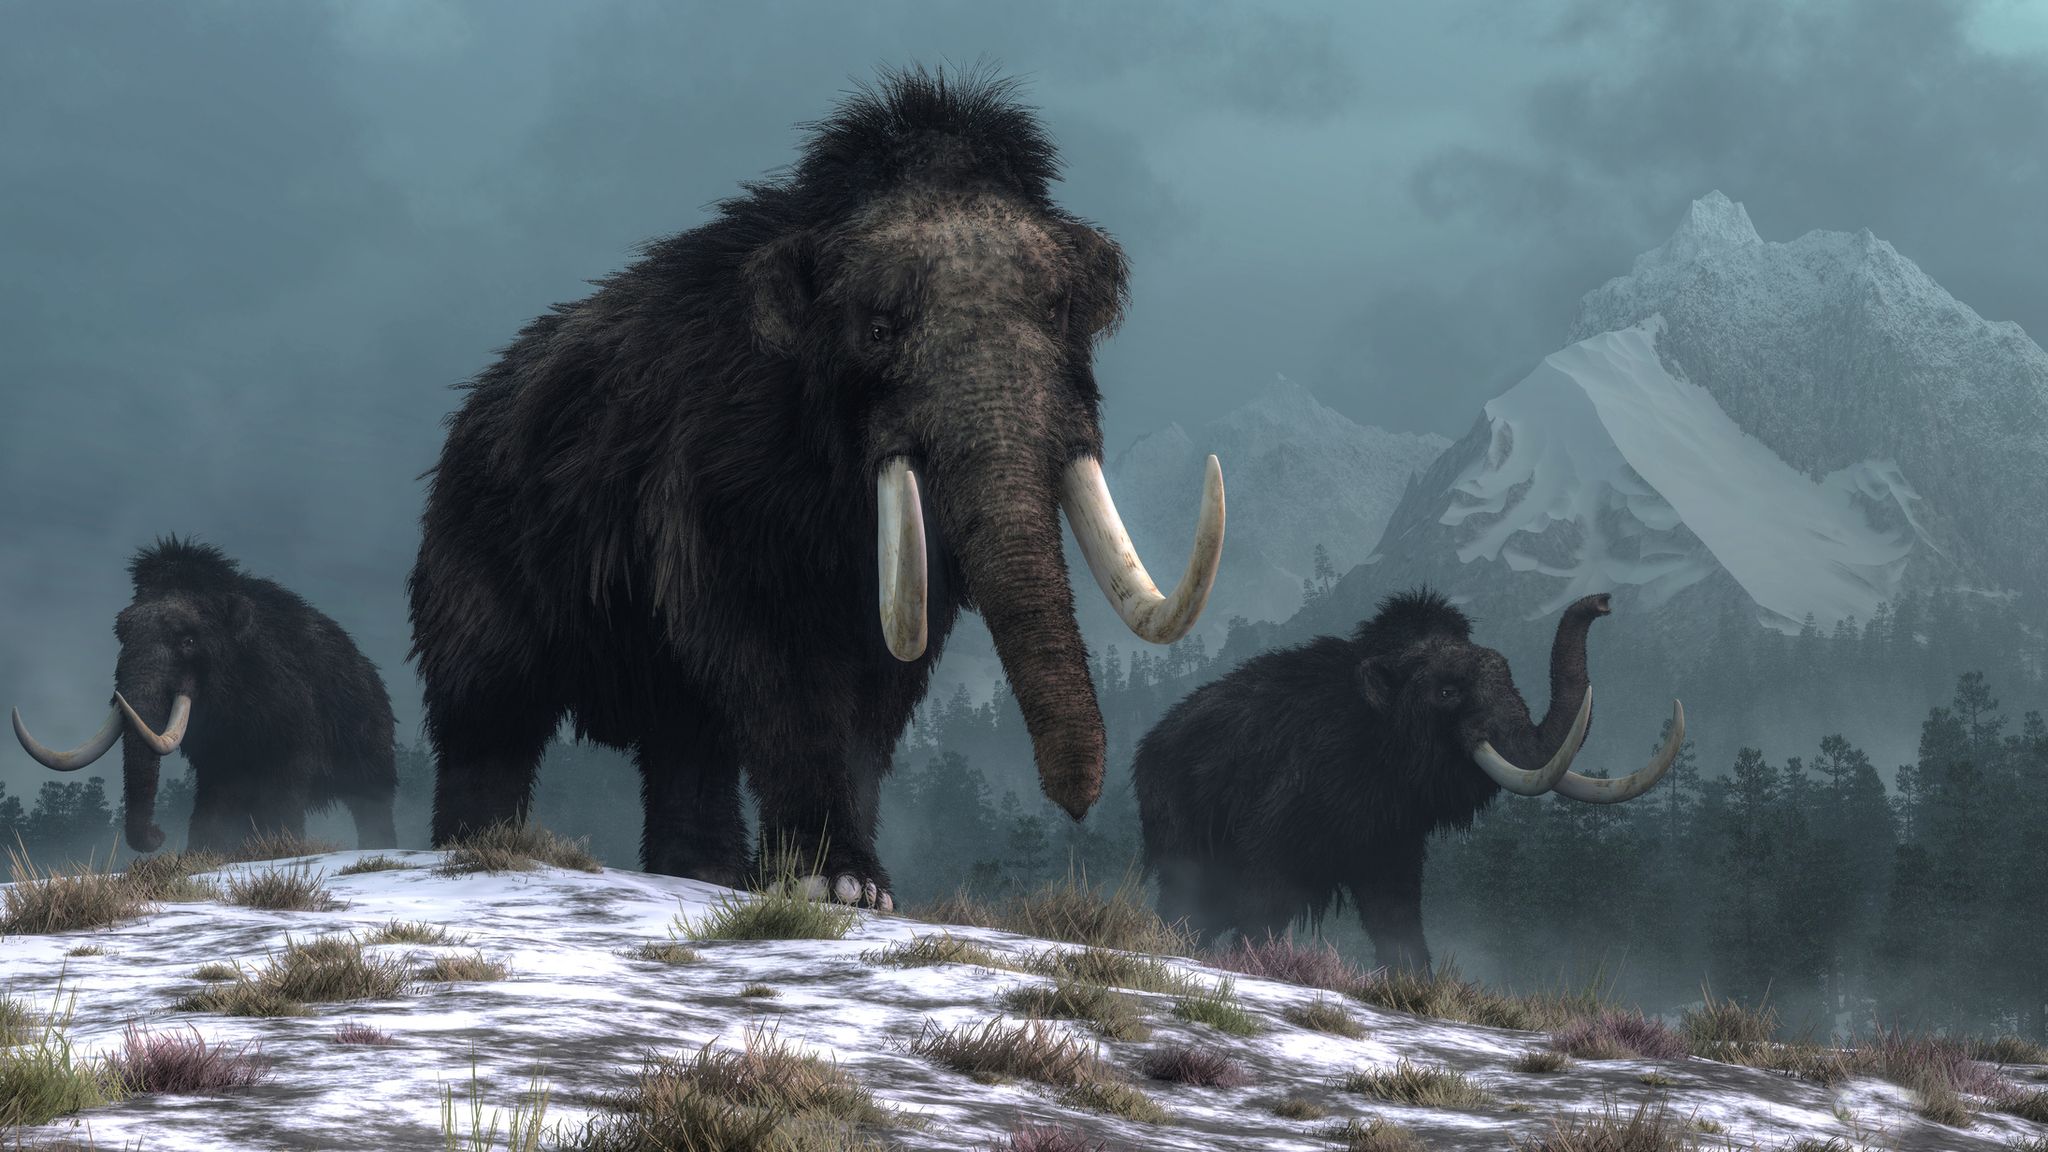 Mammoth skeleton discovery in Mexico may explain why species became